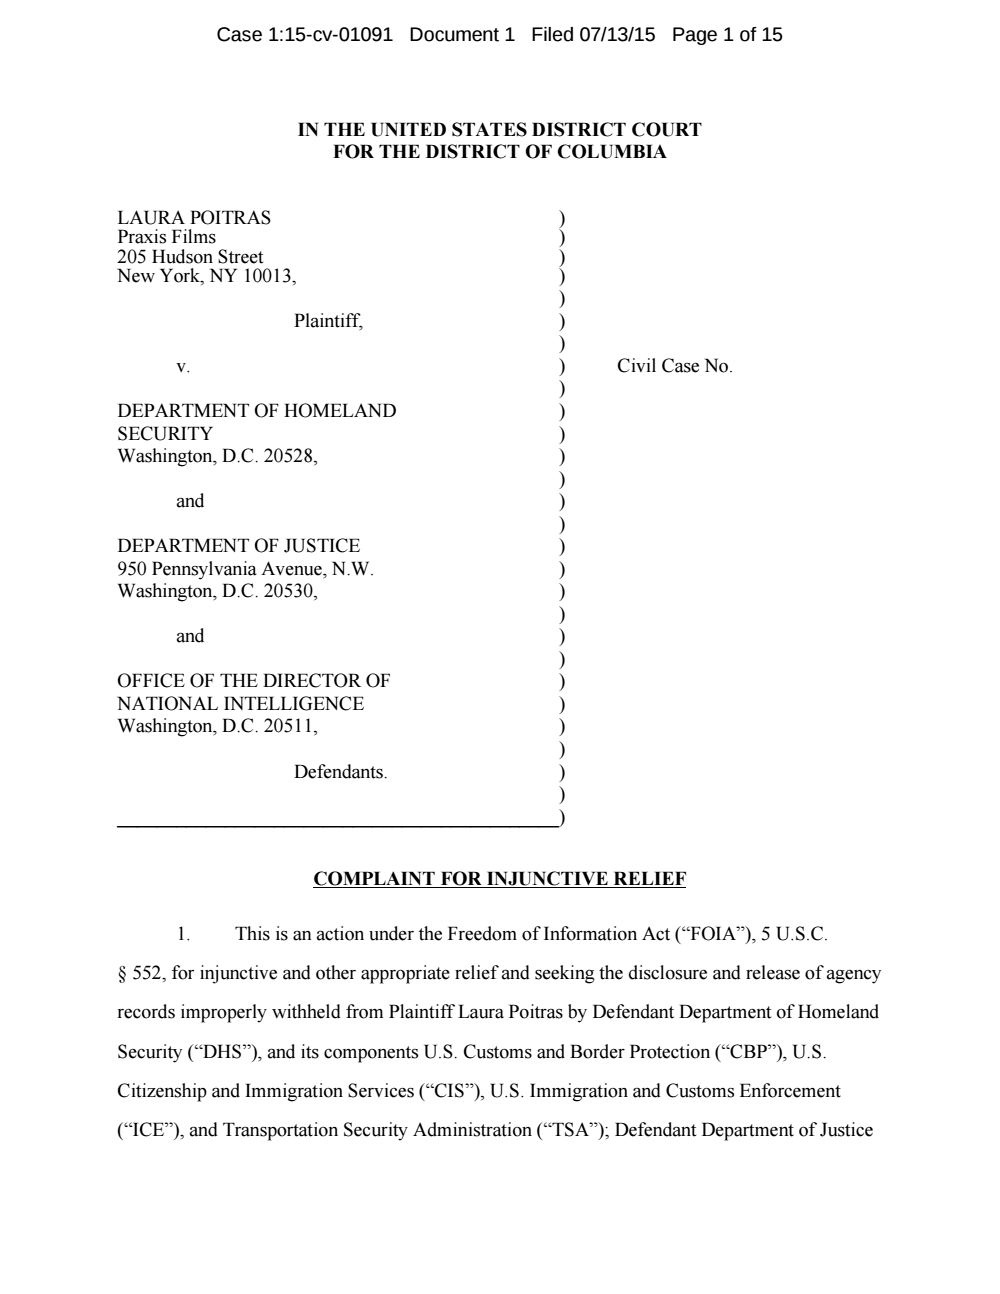 Page 1 from Laura Poitras FOIA Lawsuit